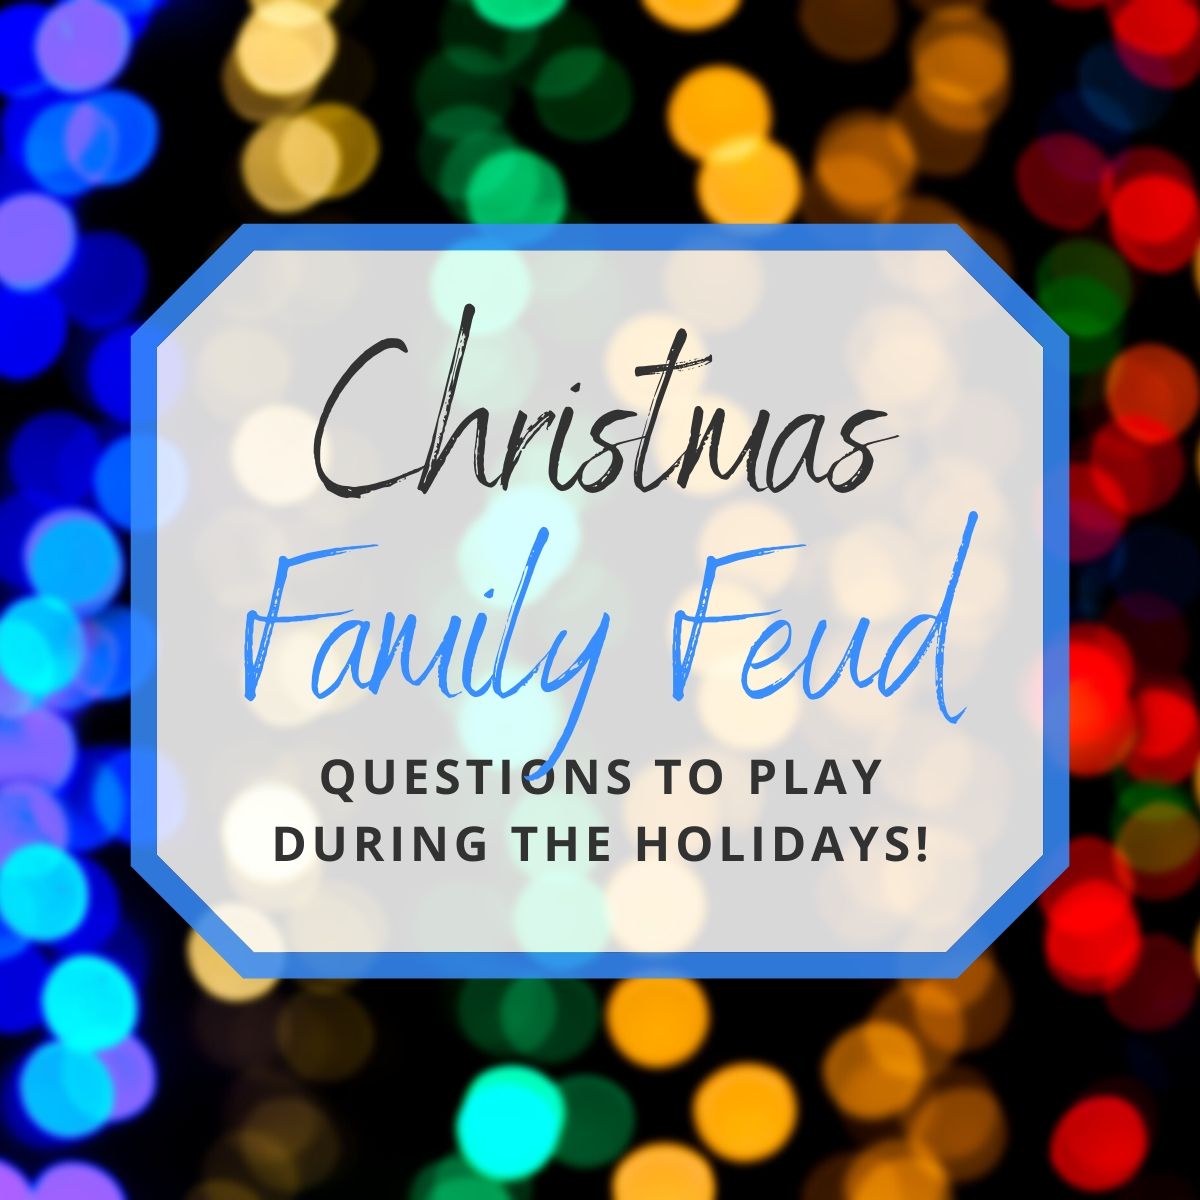 Christmas Family Feud Questions and Answers